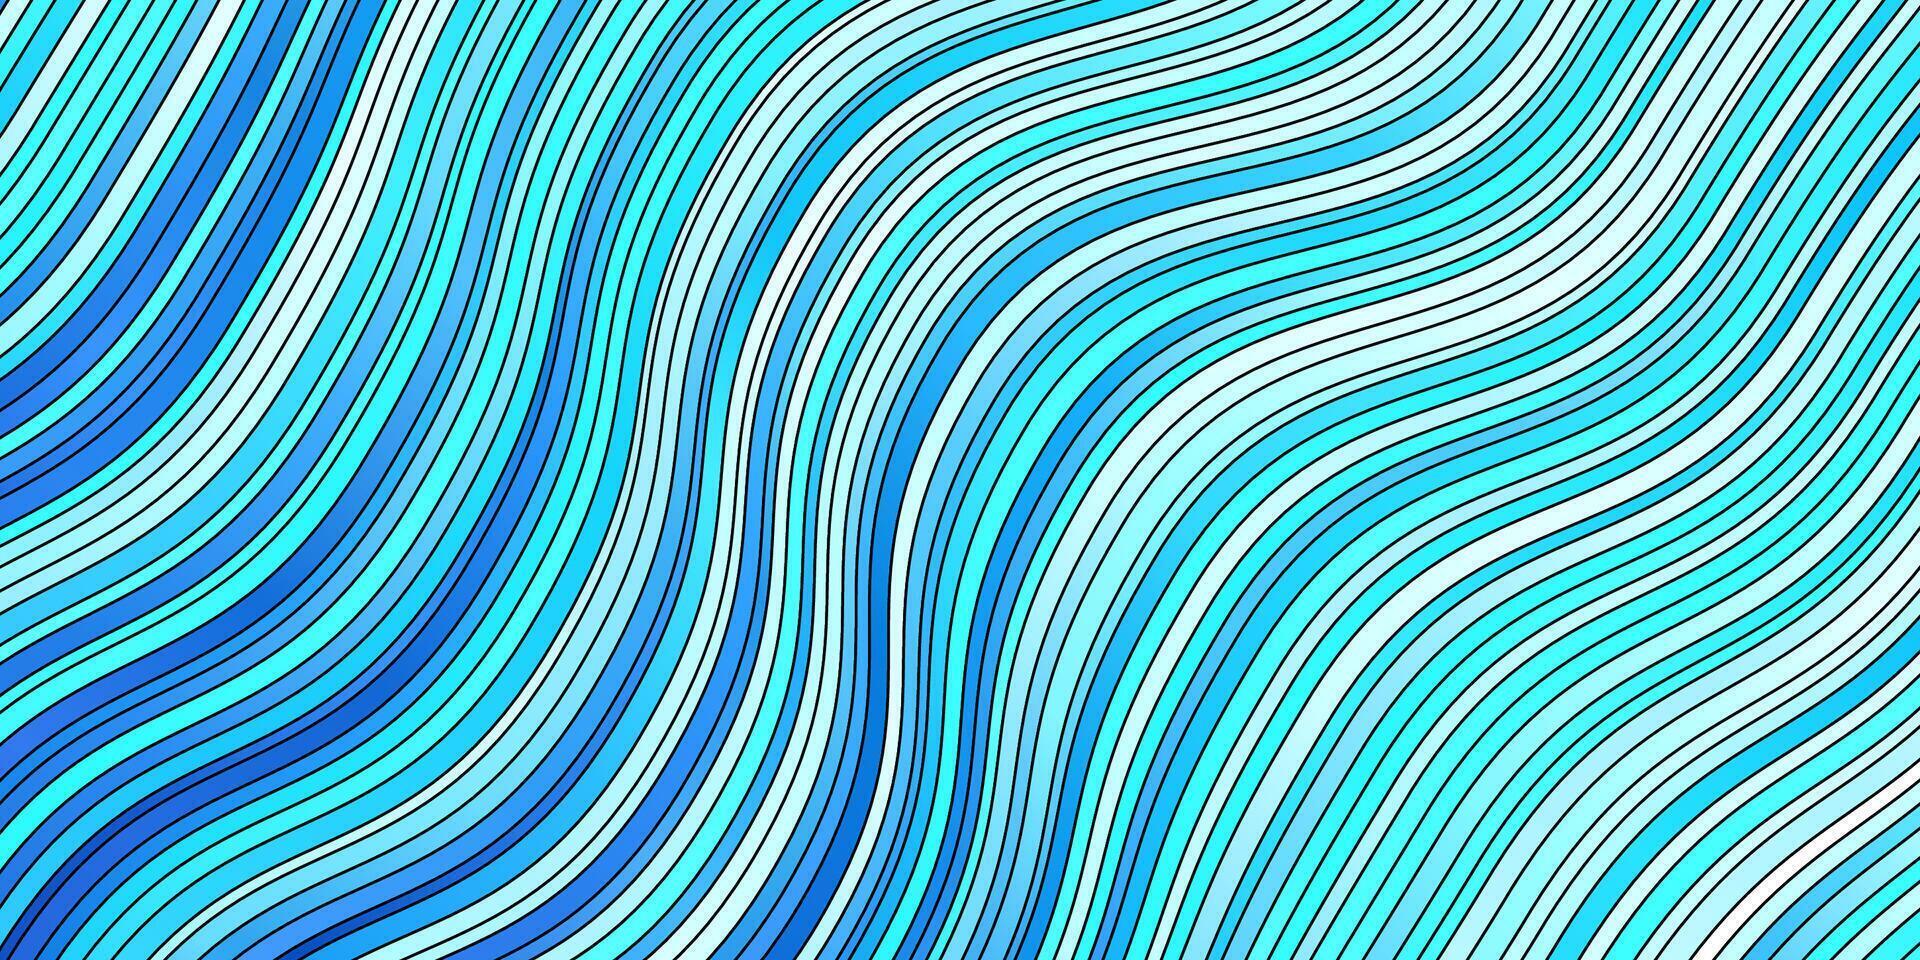 Light BLUE vector pattern with wry lines.